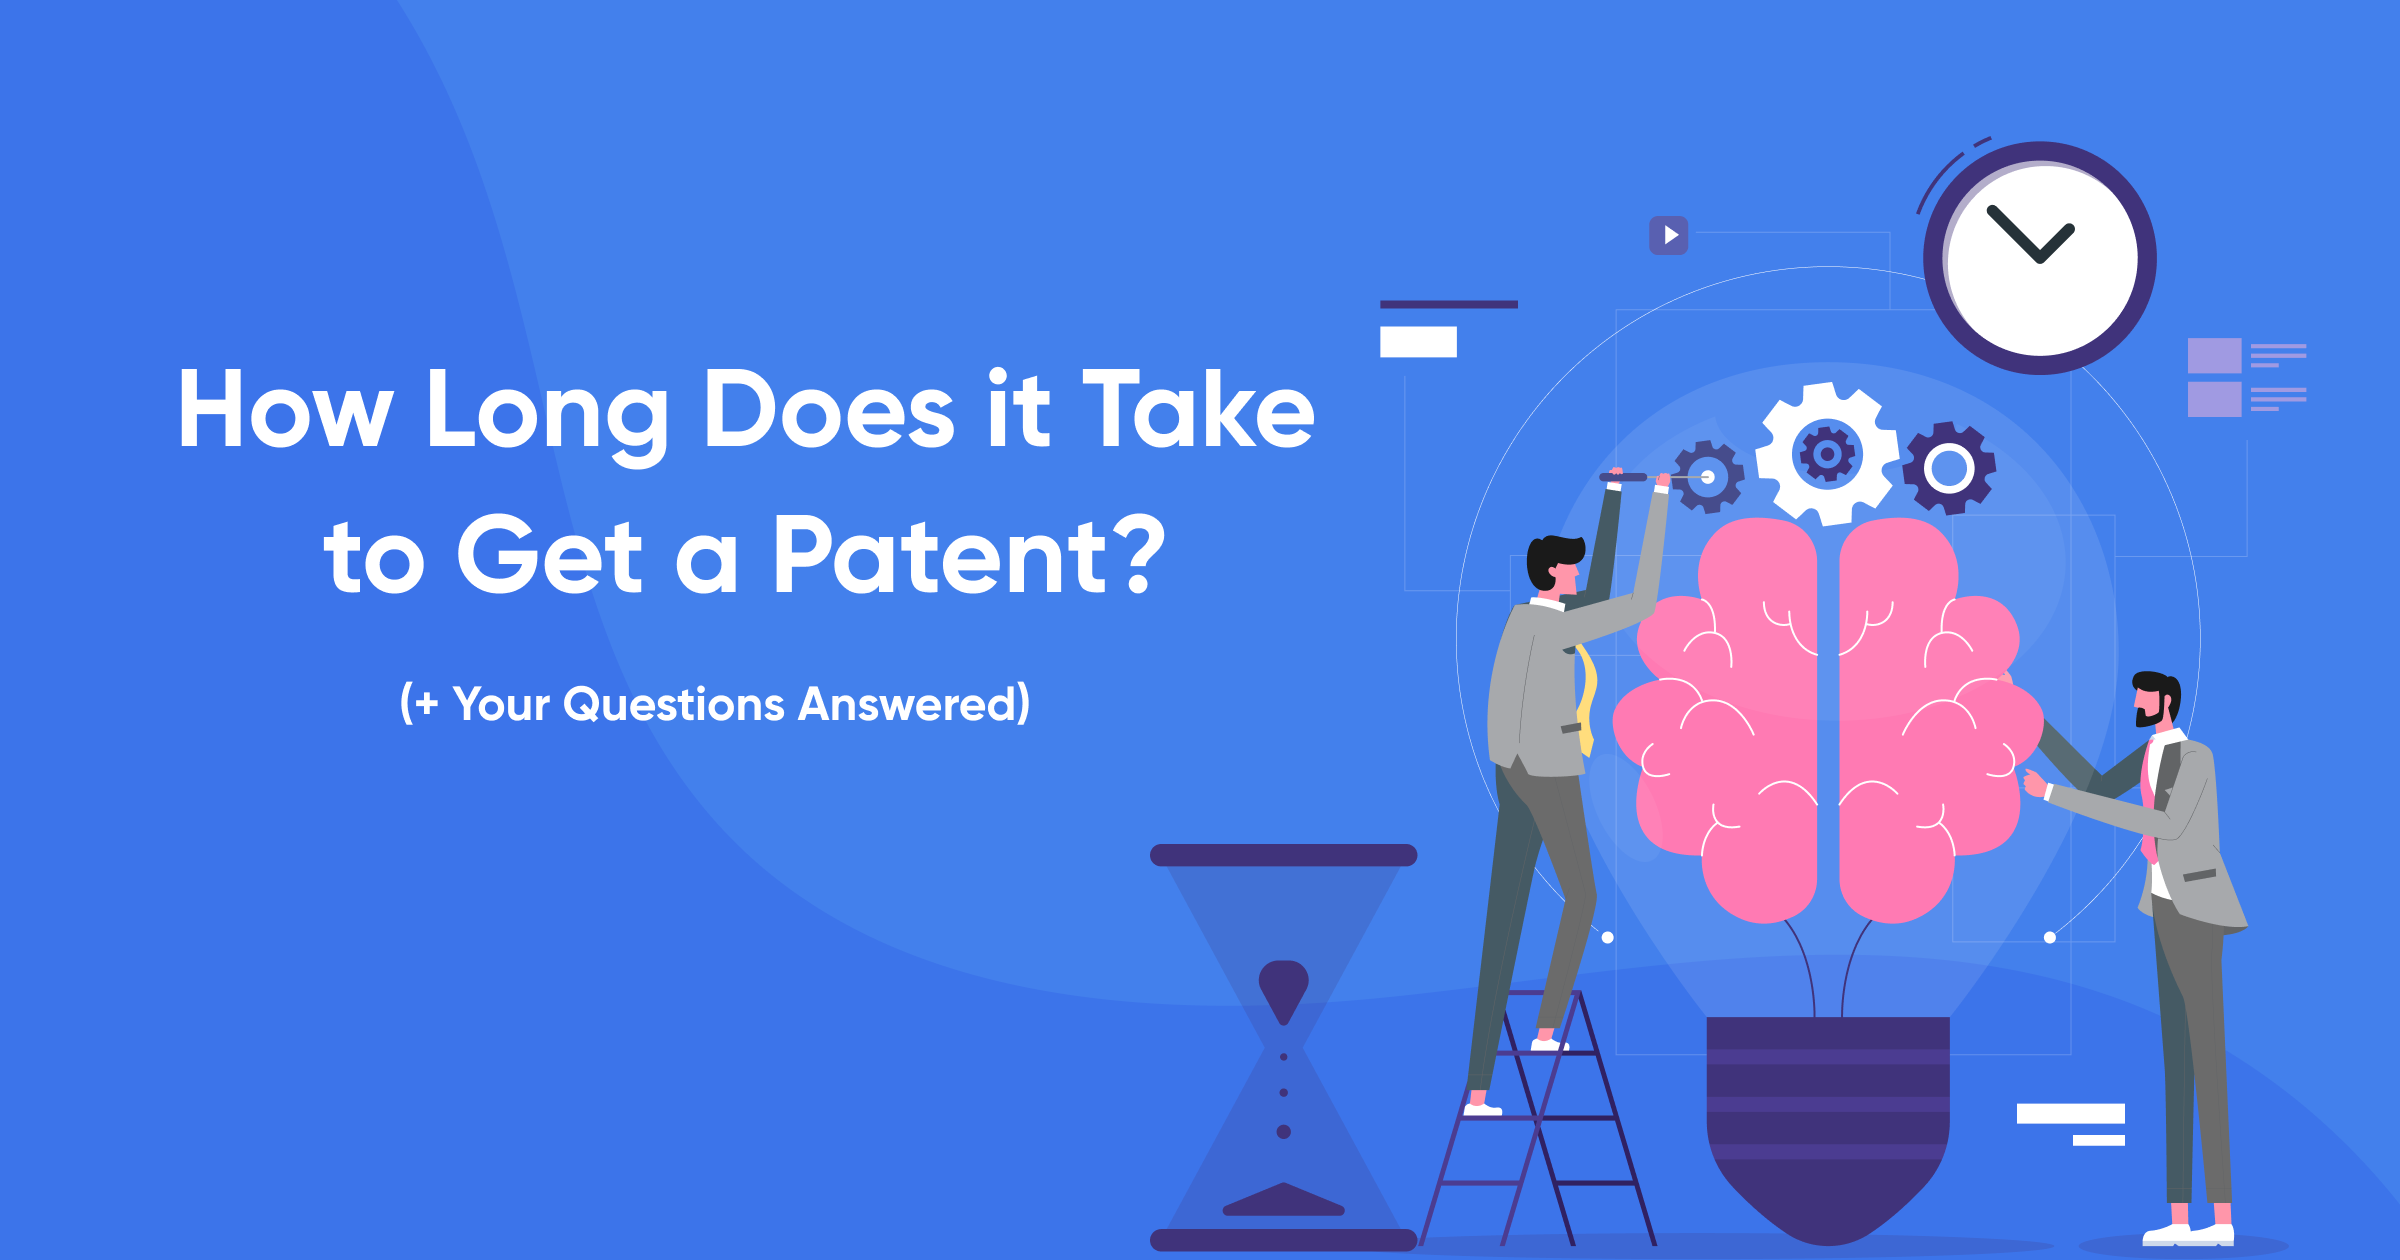 How Long Does it Take to Get a Patent? (+ Your Questions Answered)